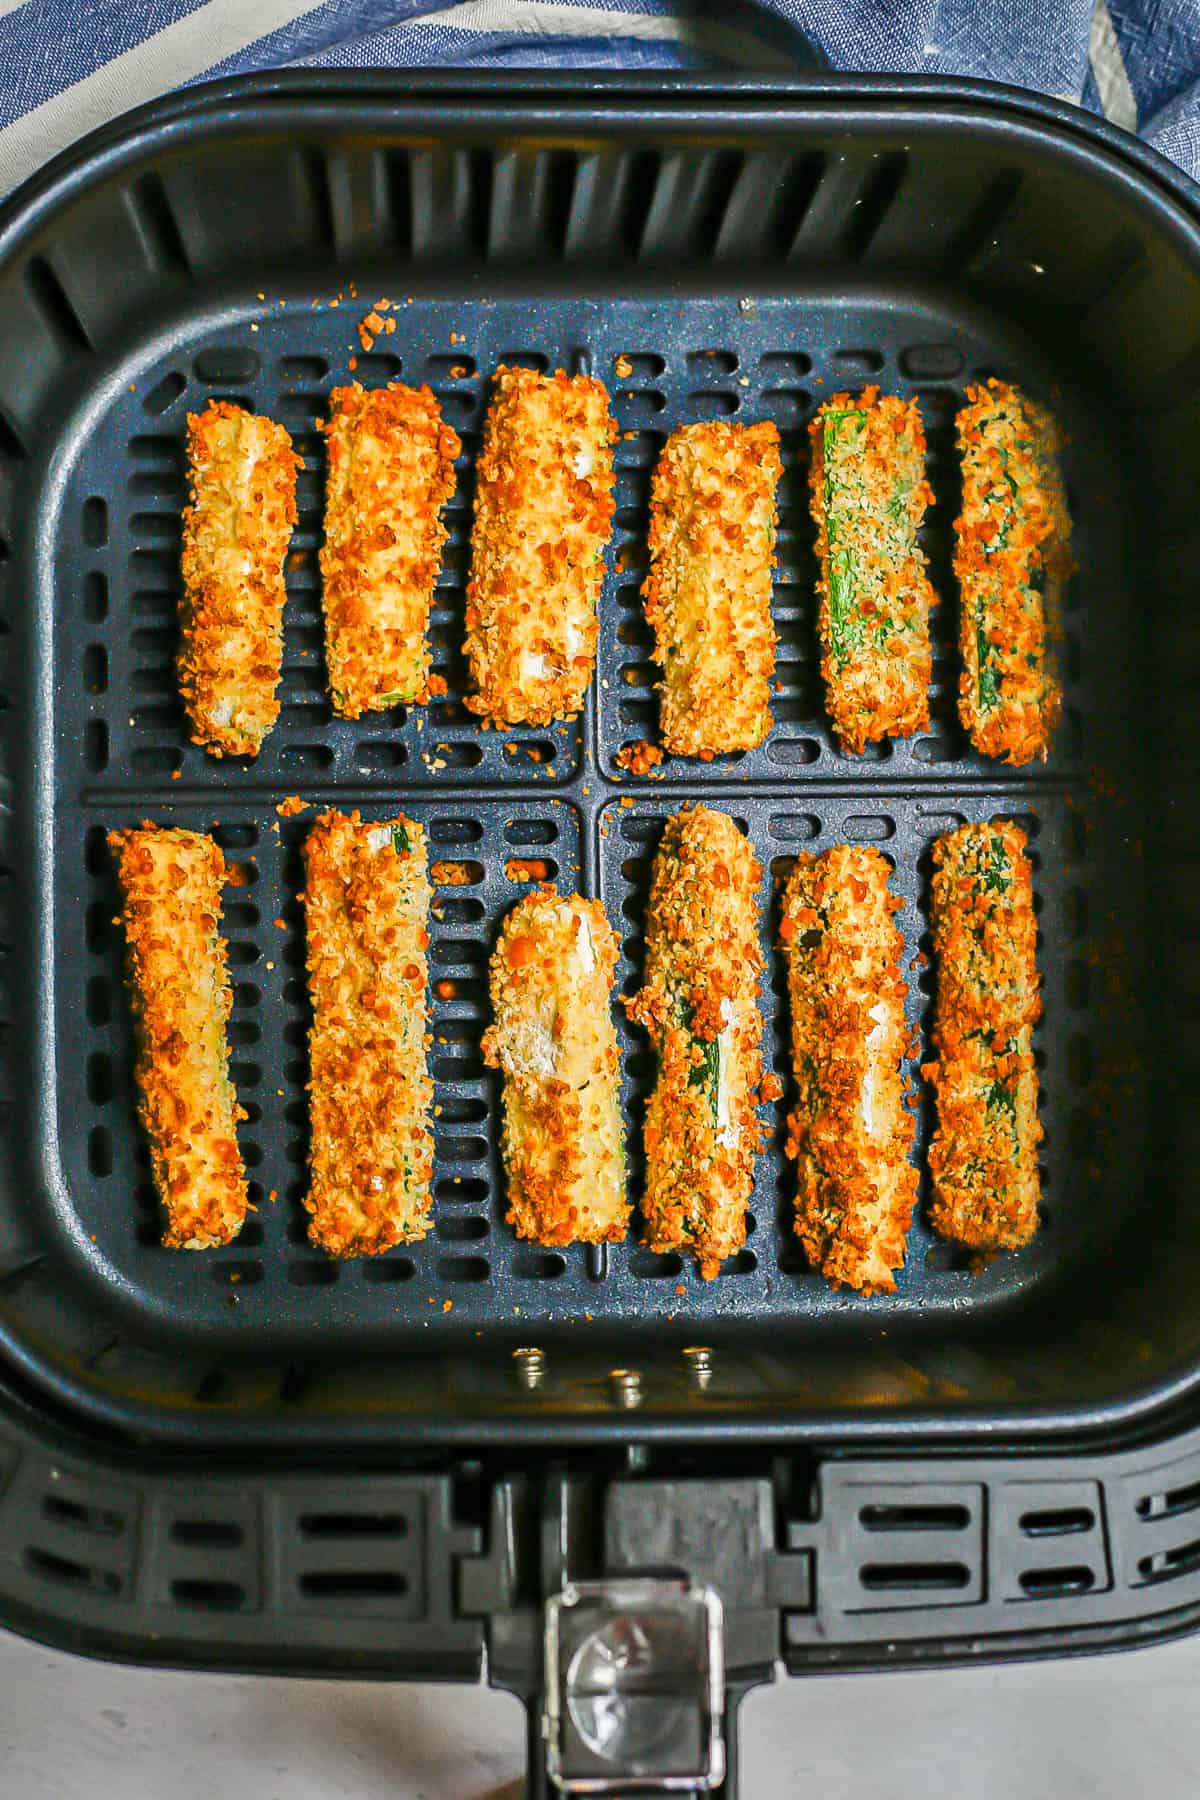 Two rows of zucchini fries cooked in an Air Fryer.